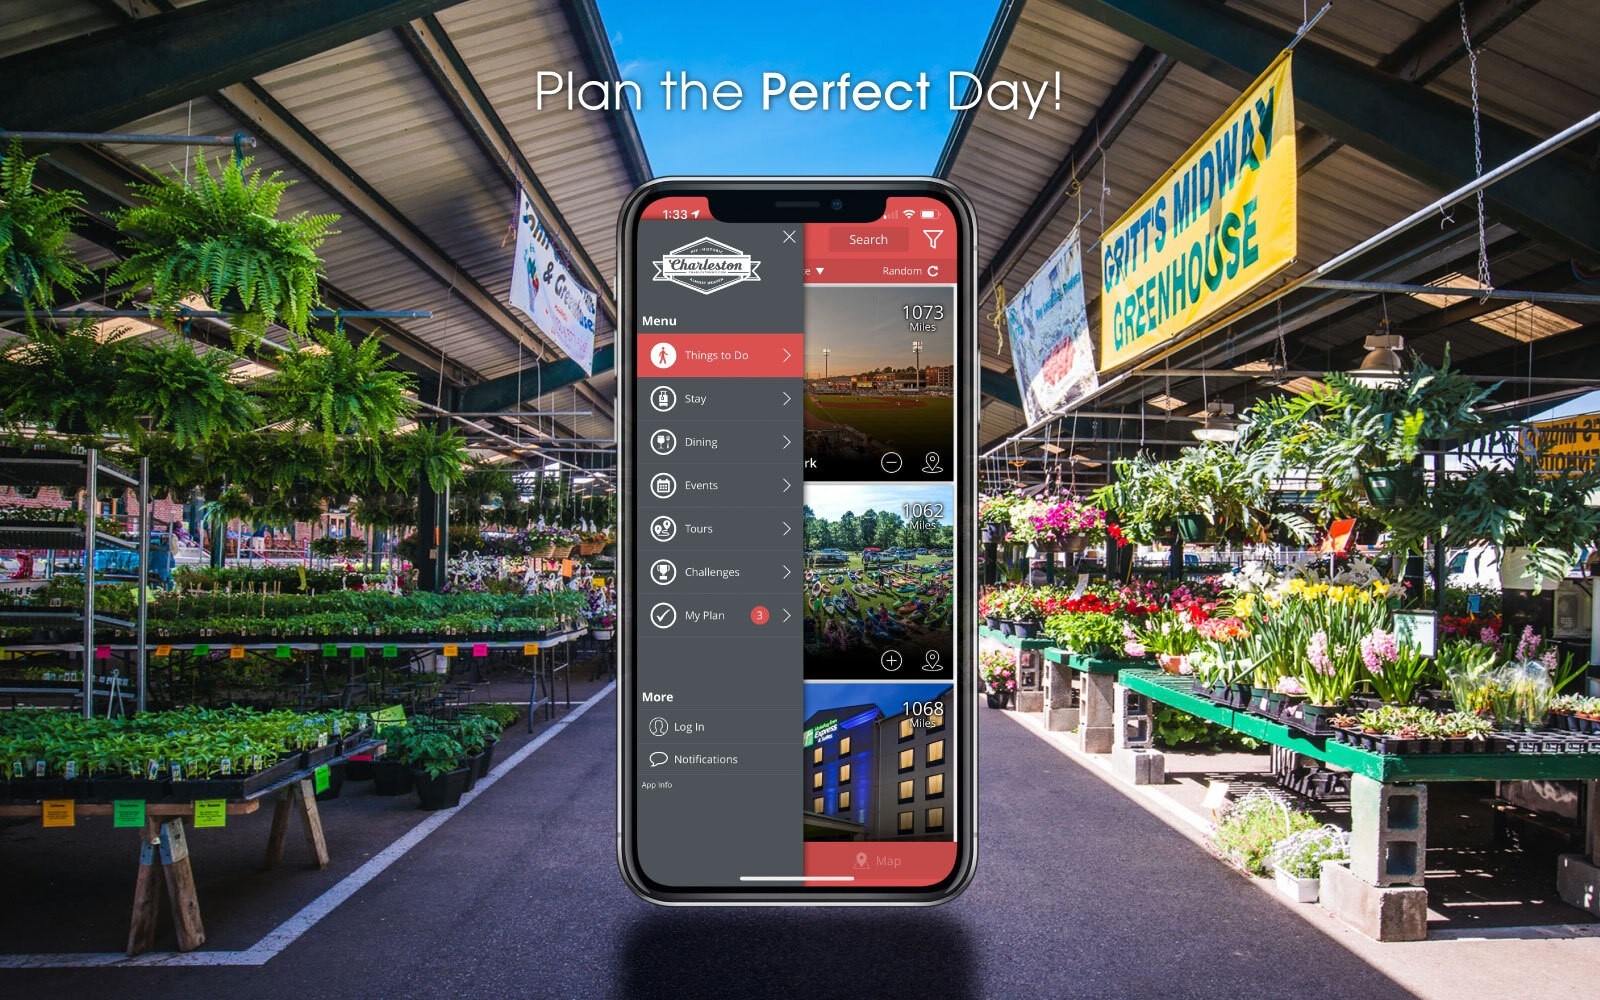 The Charleston Guide app in front of a greenhouse.